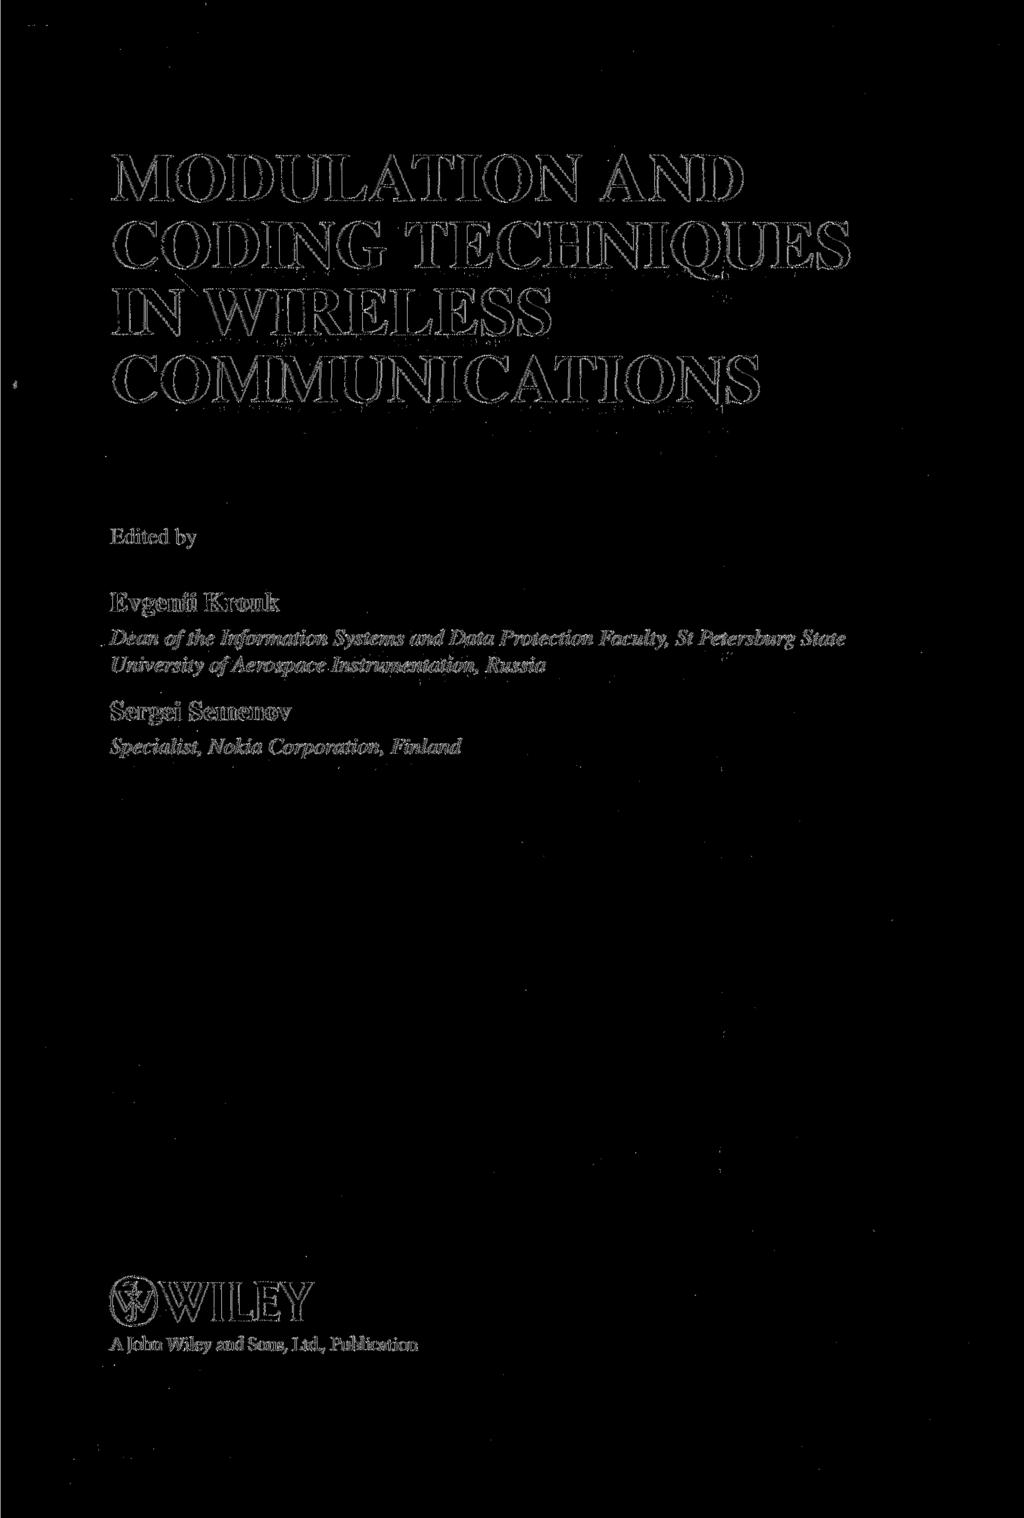 MODULATION AND CODING TECHNIQUES IN WIRELESS COMMUNICATIONS Edited by Evgenii Krouk Dean of the Information Systems and Data Protection Faculty, St